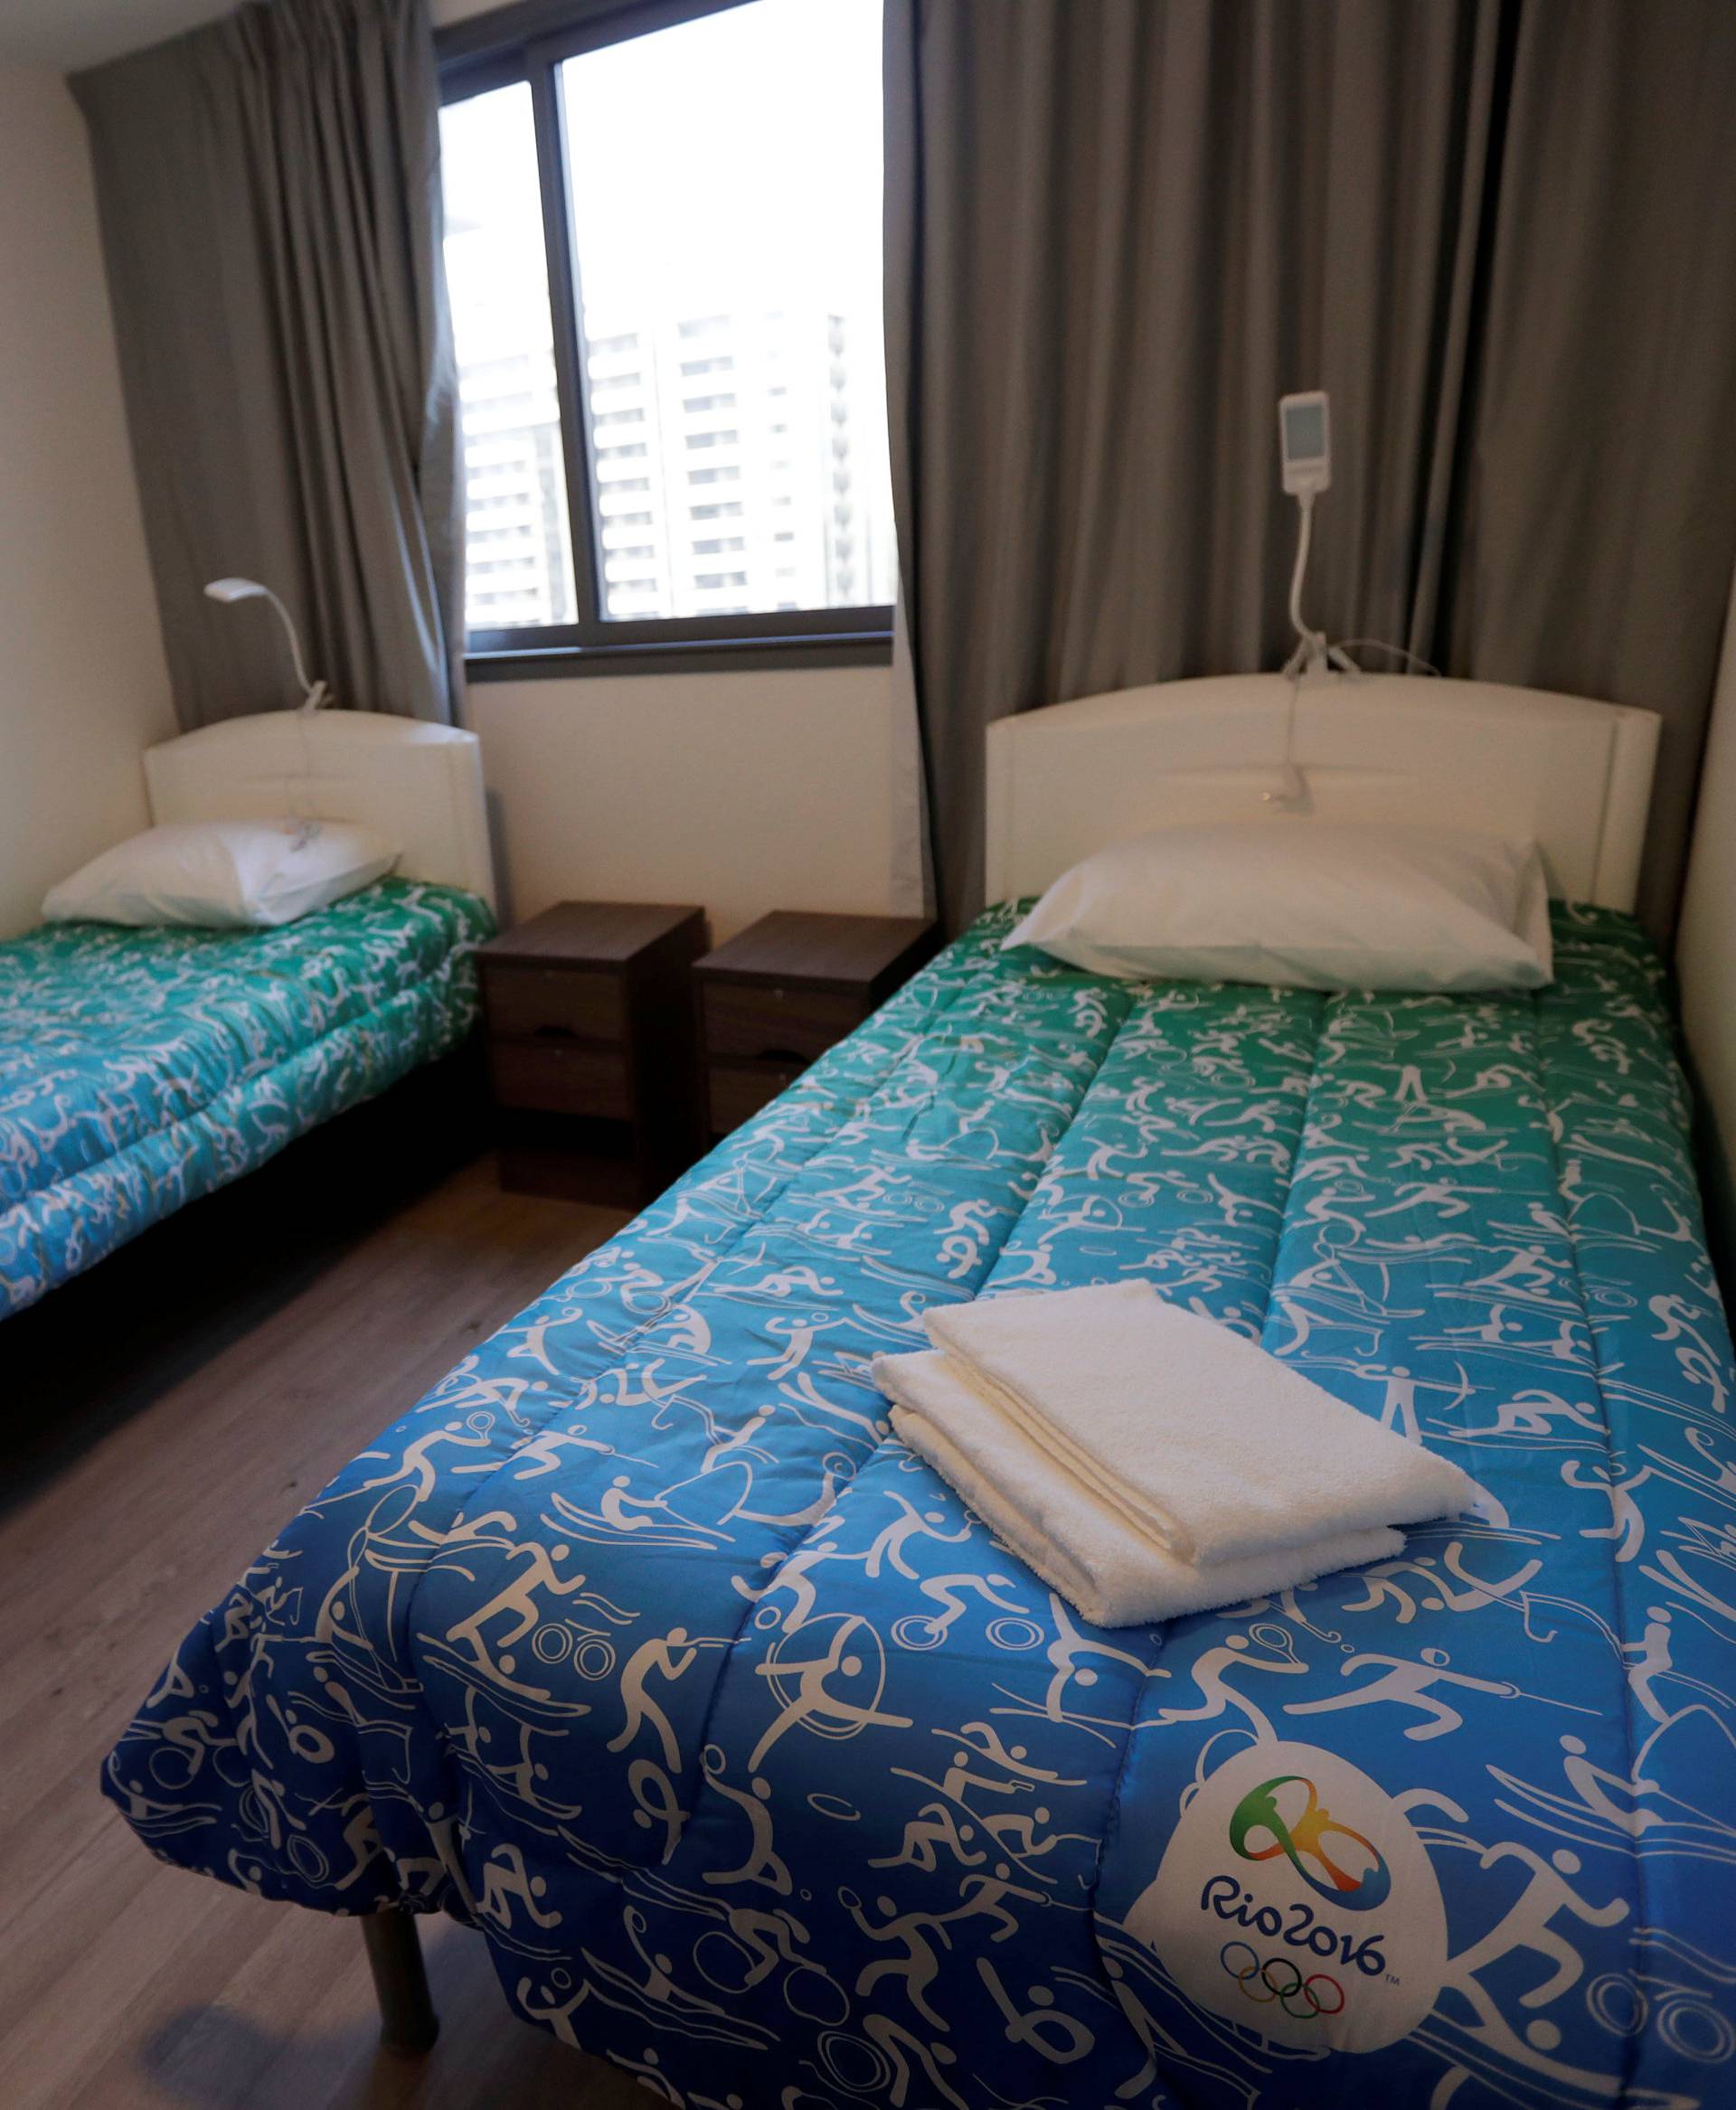 Beds are seen inside the athletes' accommodation during a guided tour for journalists to the 2016 Rio Olympics Village in Rio de Janeiro